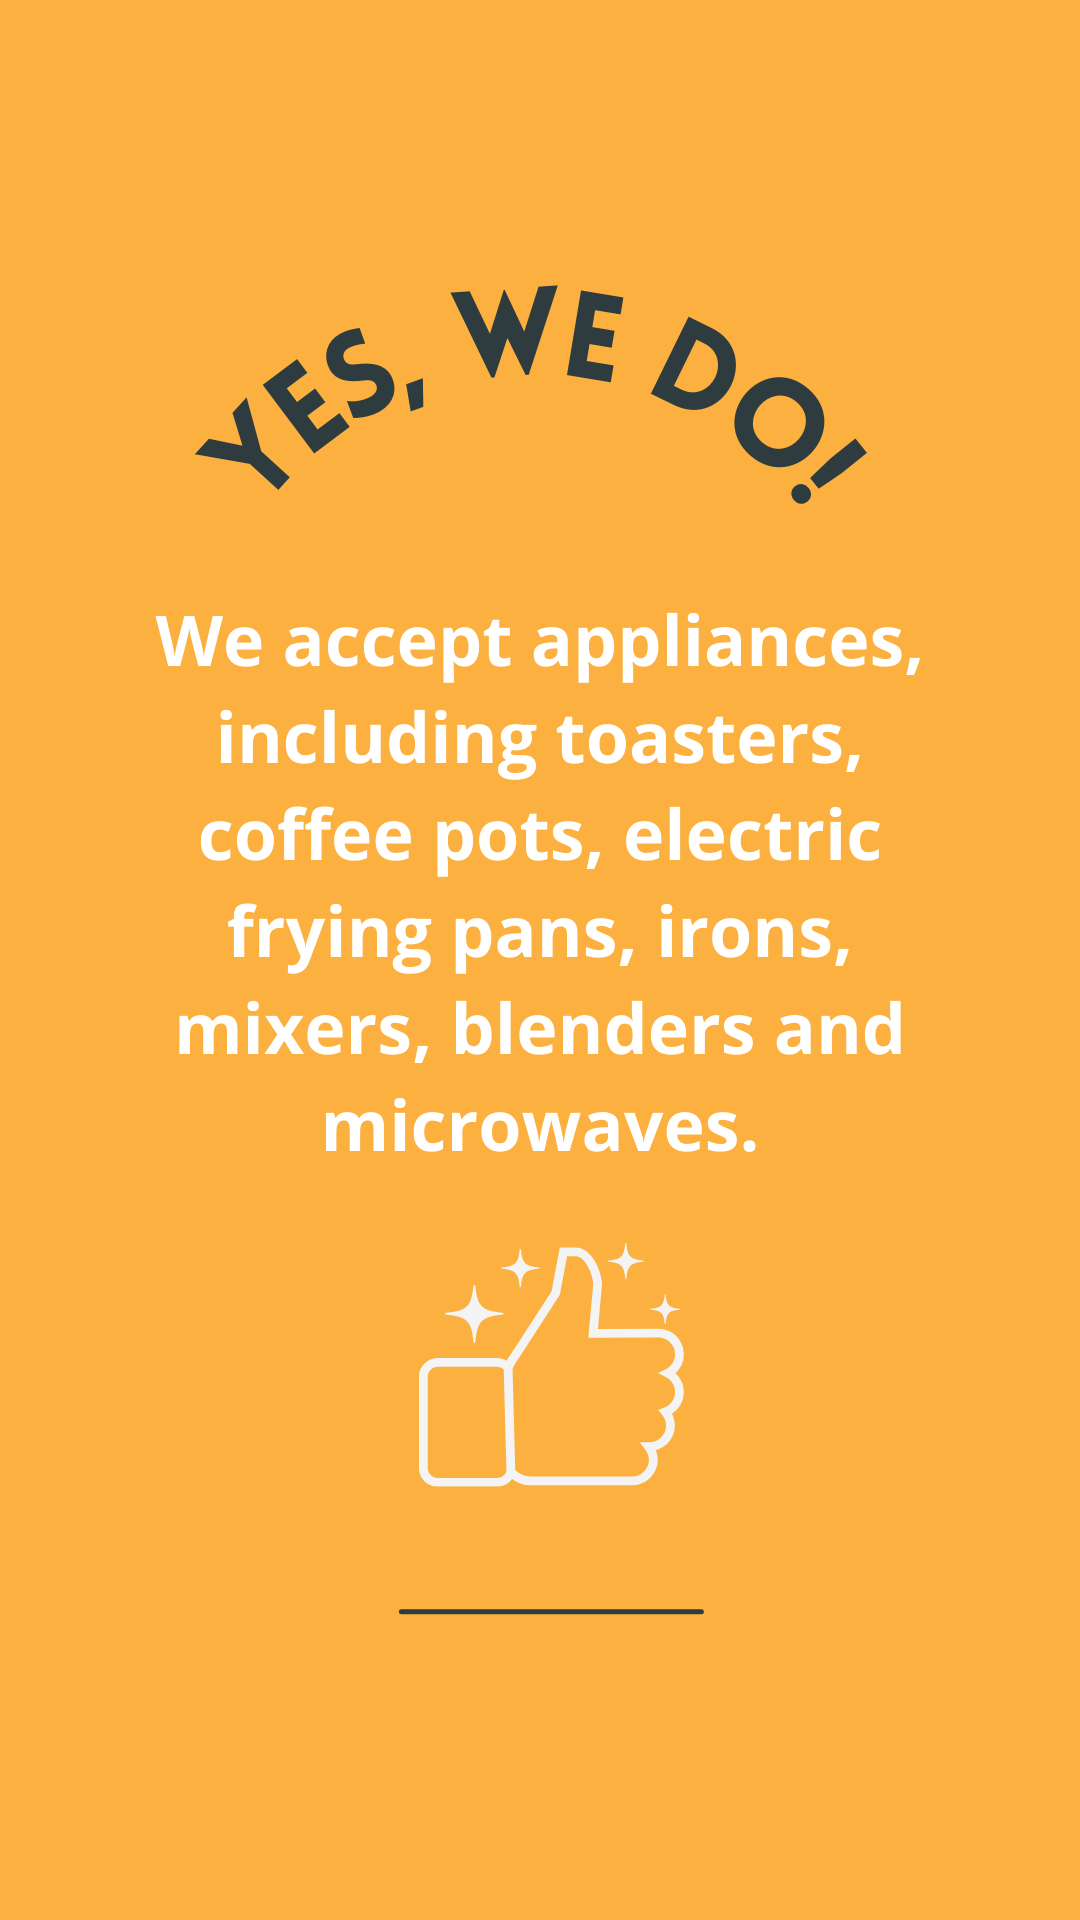  goodwill poster on donating small appliances